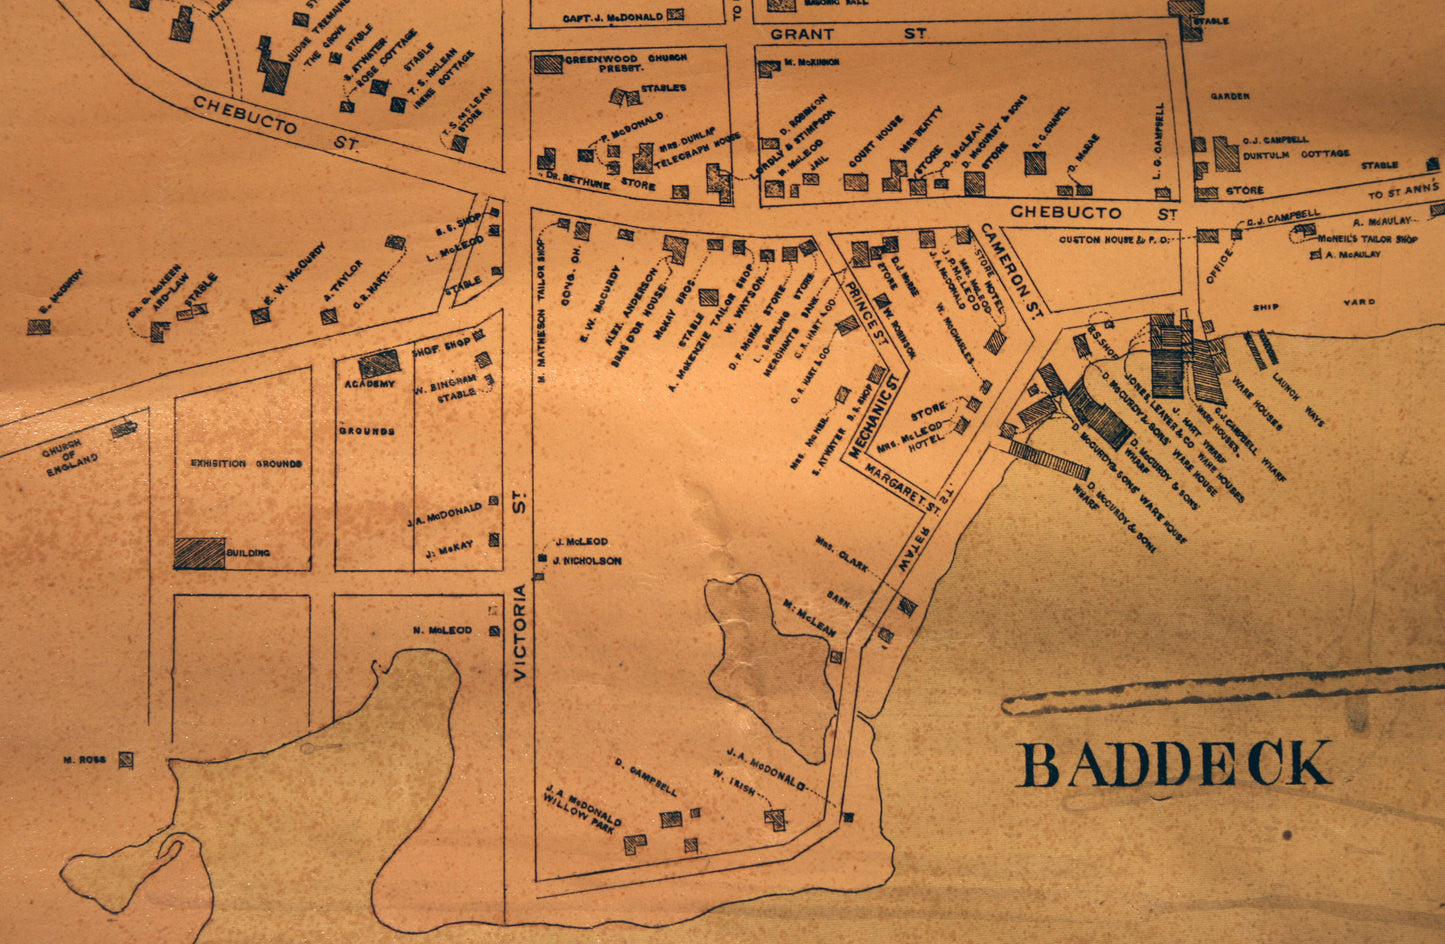 "Baddeck" inset of Topographical Township Map of Victoria County, Nova Scotia